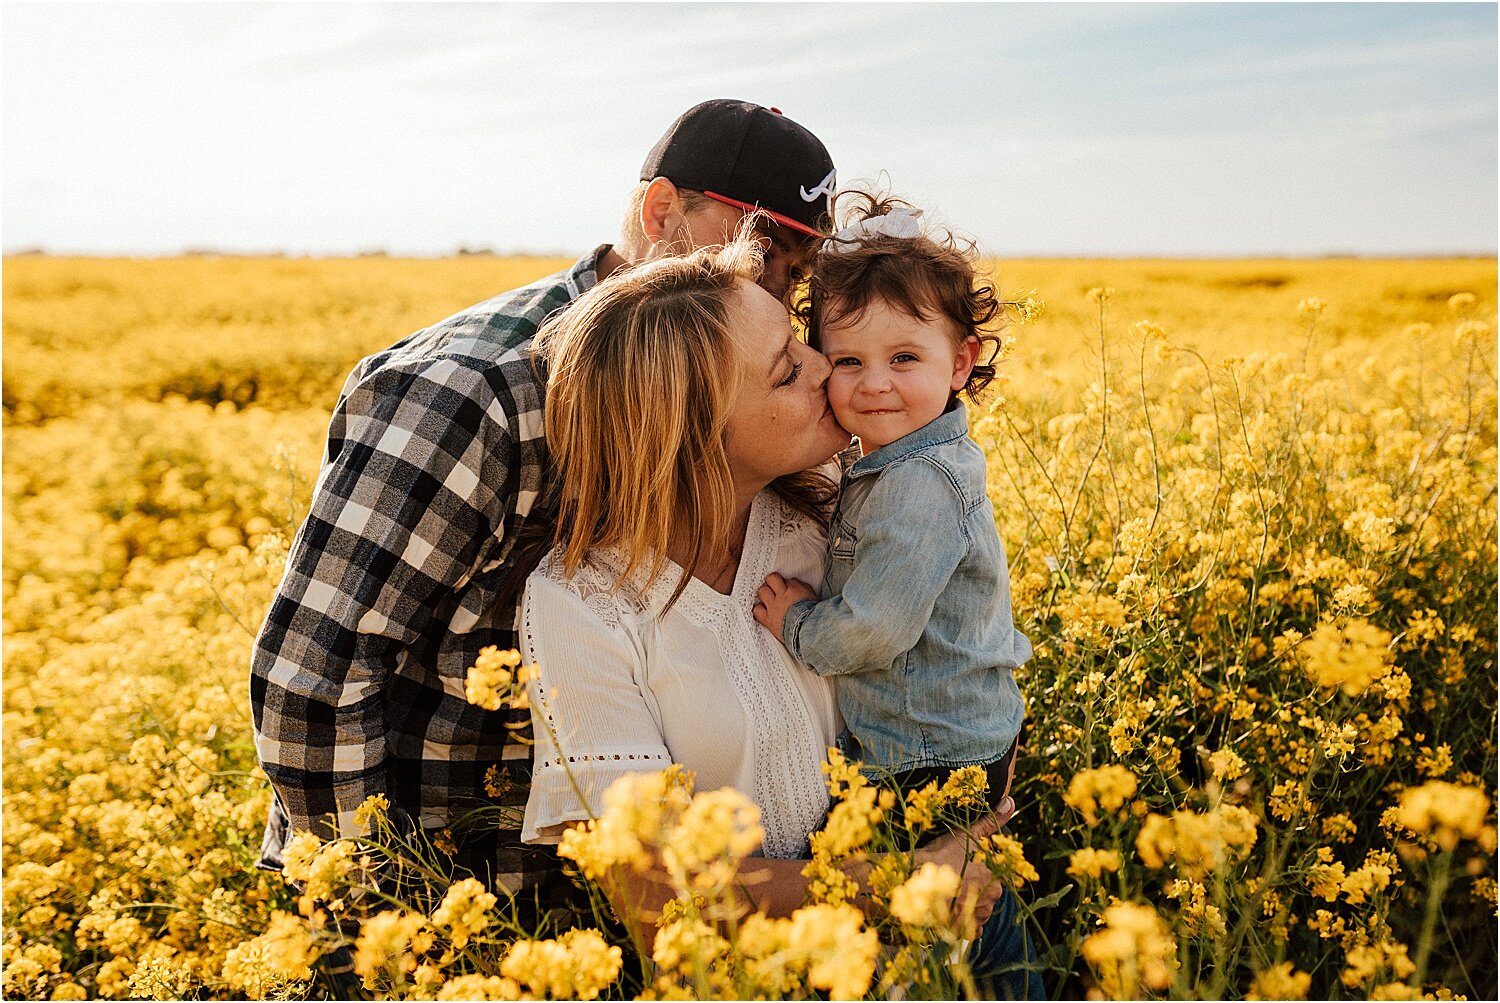 spring field of yellow flowers family session6.jpg